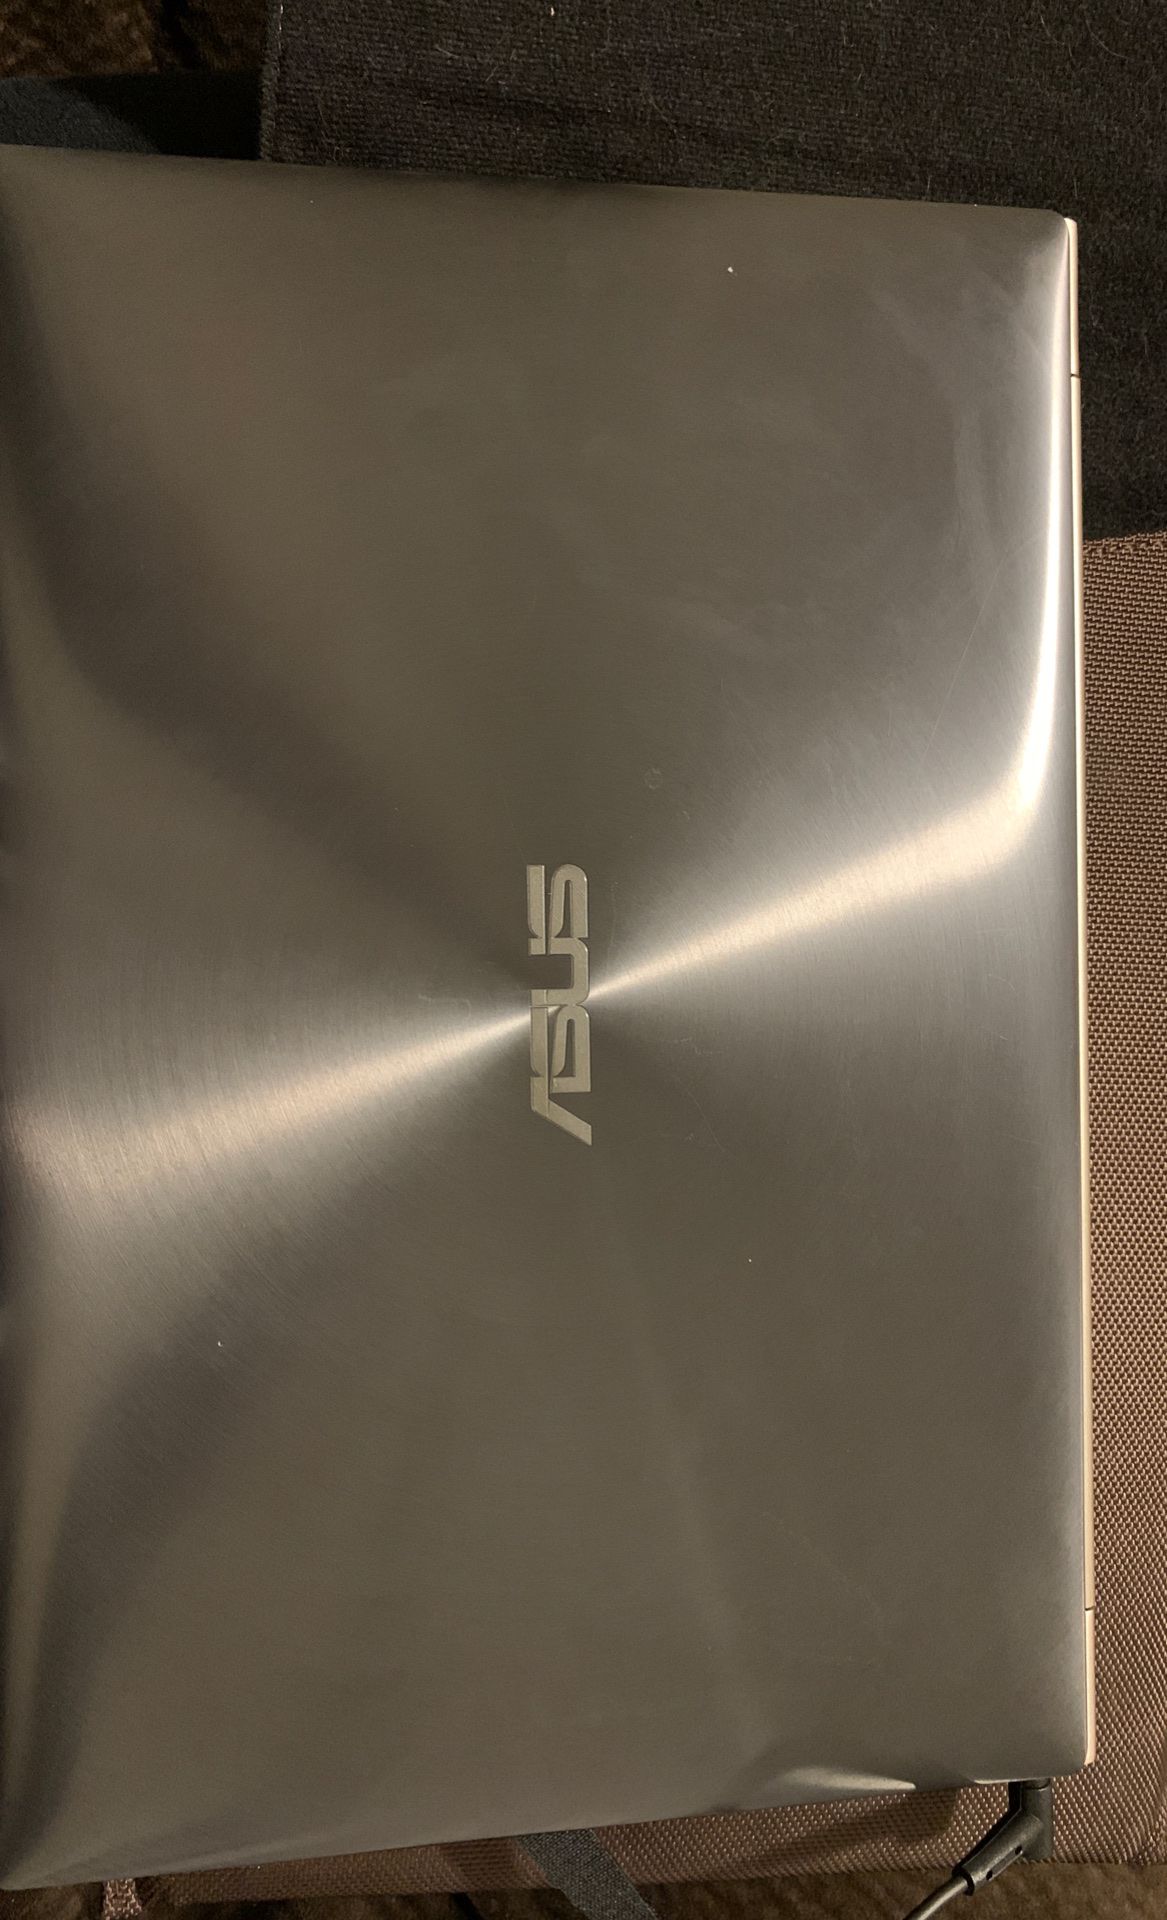 2015 barely used Asus Laptop